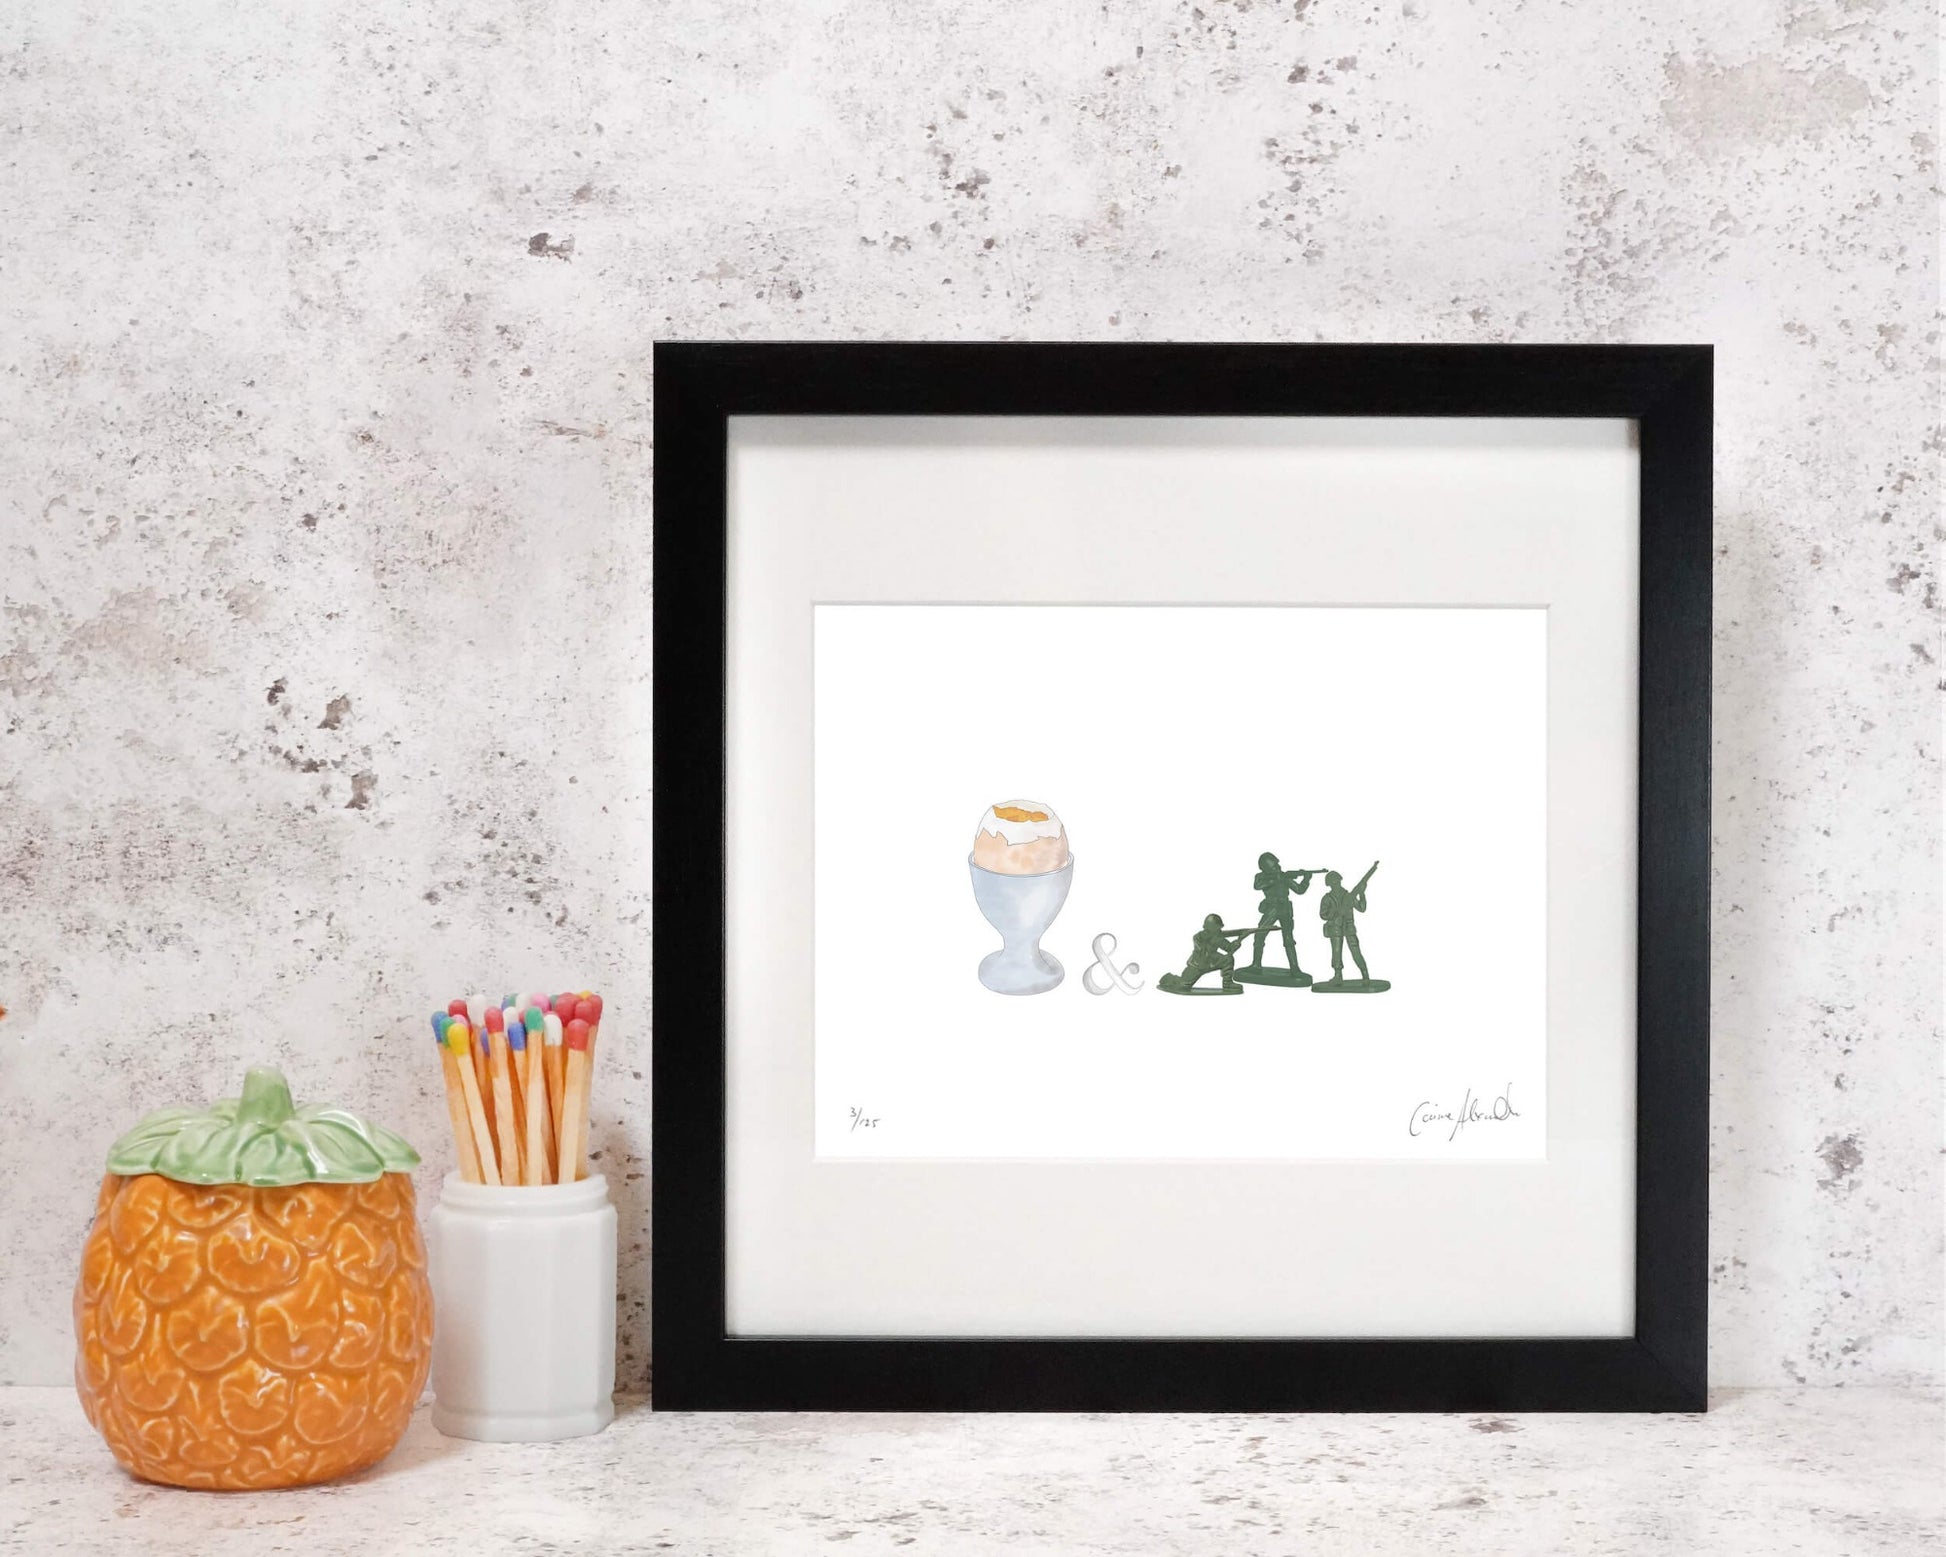 Framed Egg and Soldiers Print